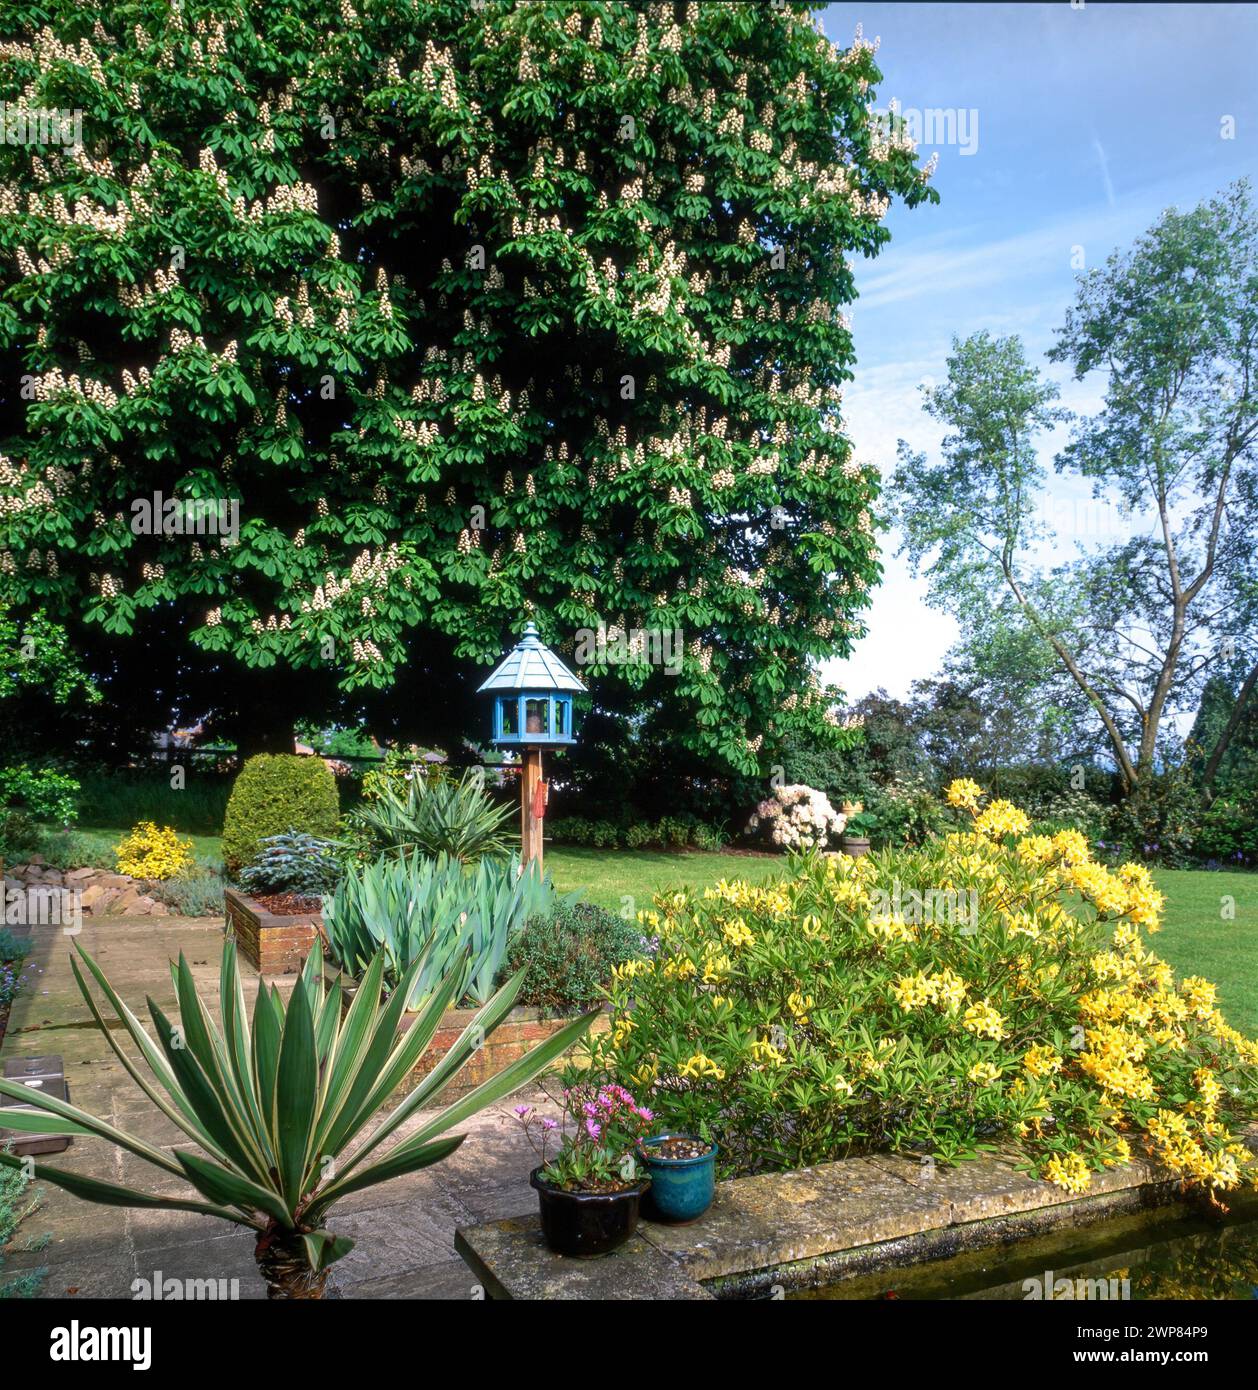 Pretty landscaped domestic garden with horse chestnut tree in blossom, lawns, raised beds and ornate bird feeder, May, Leicestershire,England, UK Stock Photo